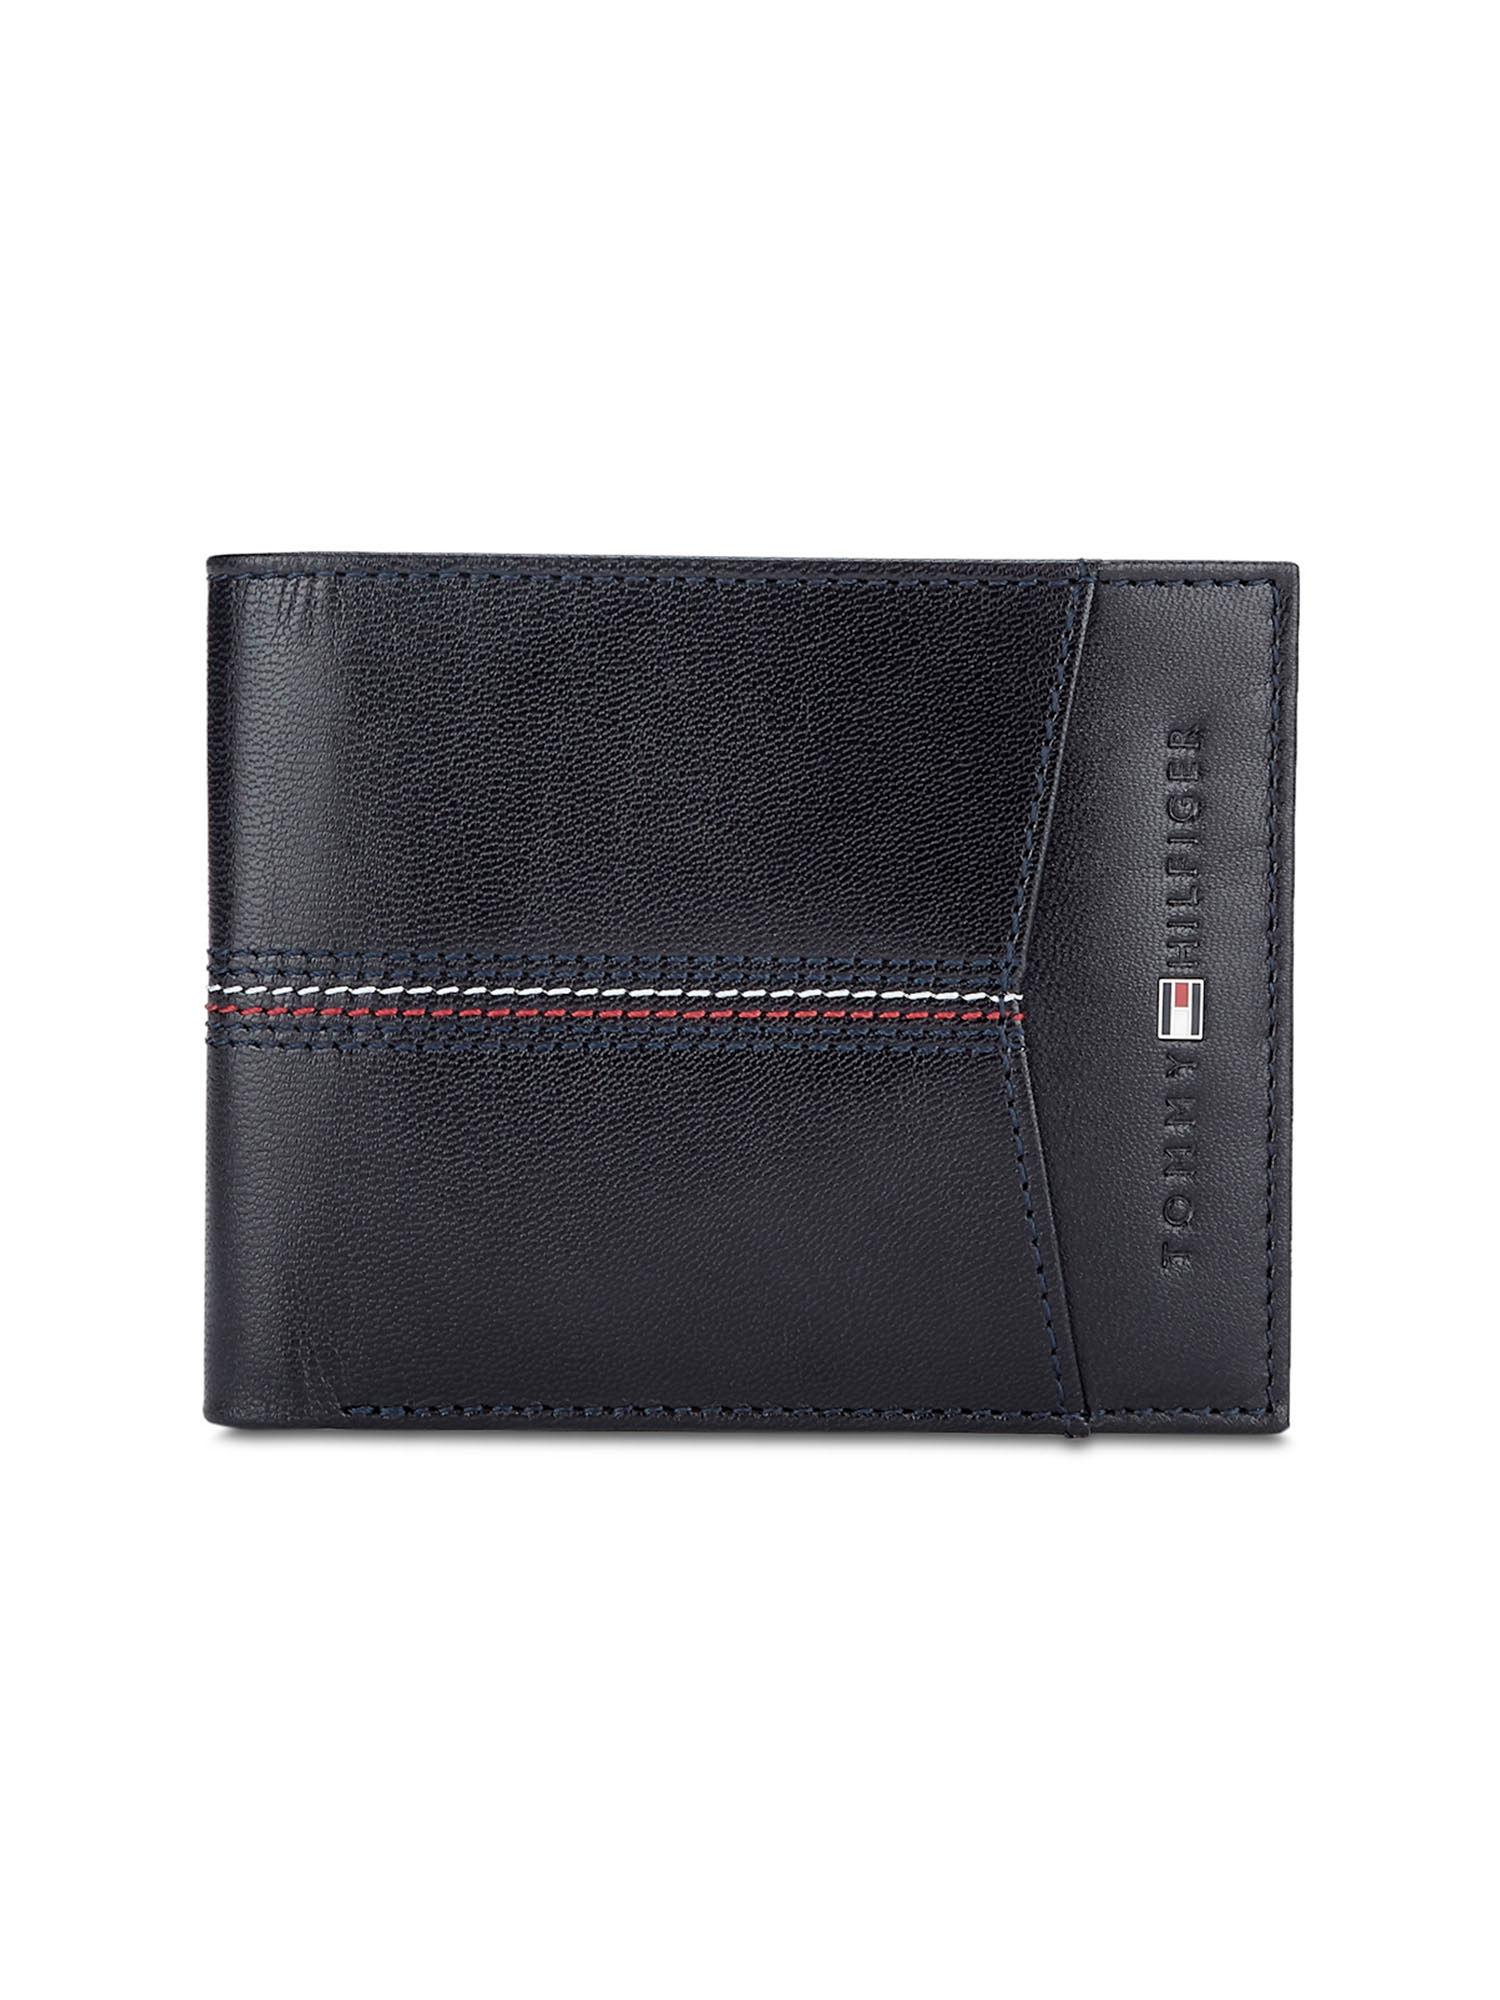 Navy Blue Enoch Global Coin Wallet